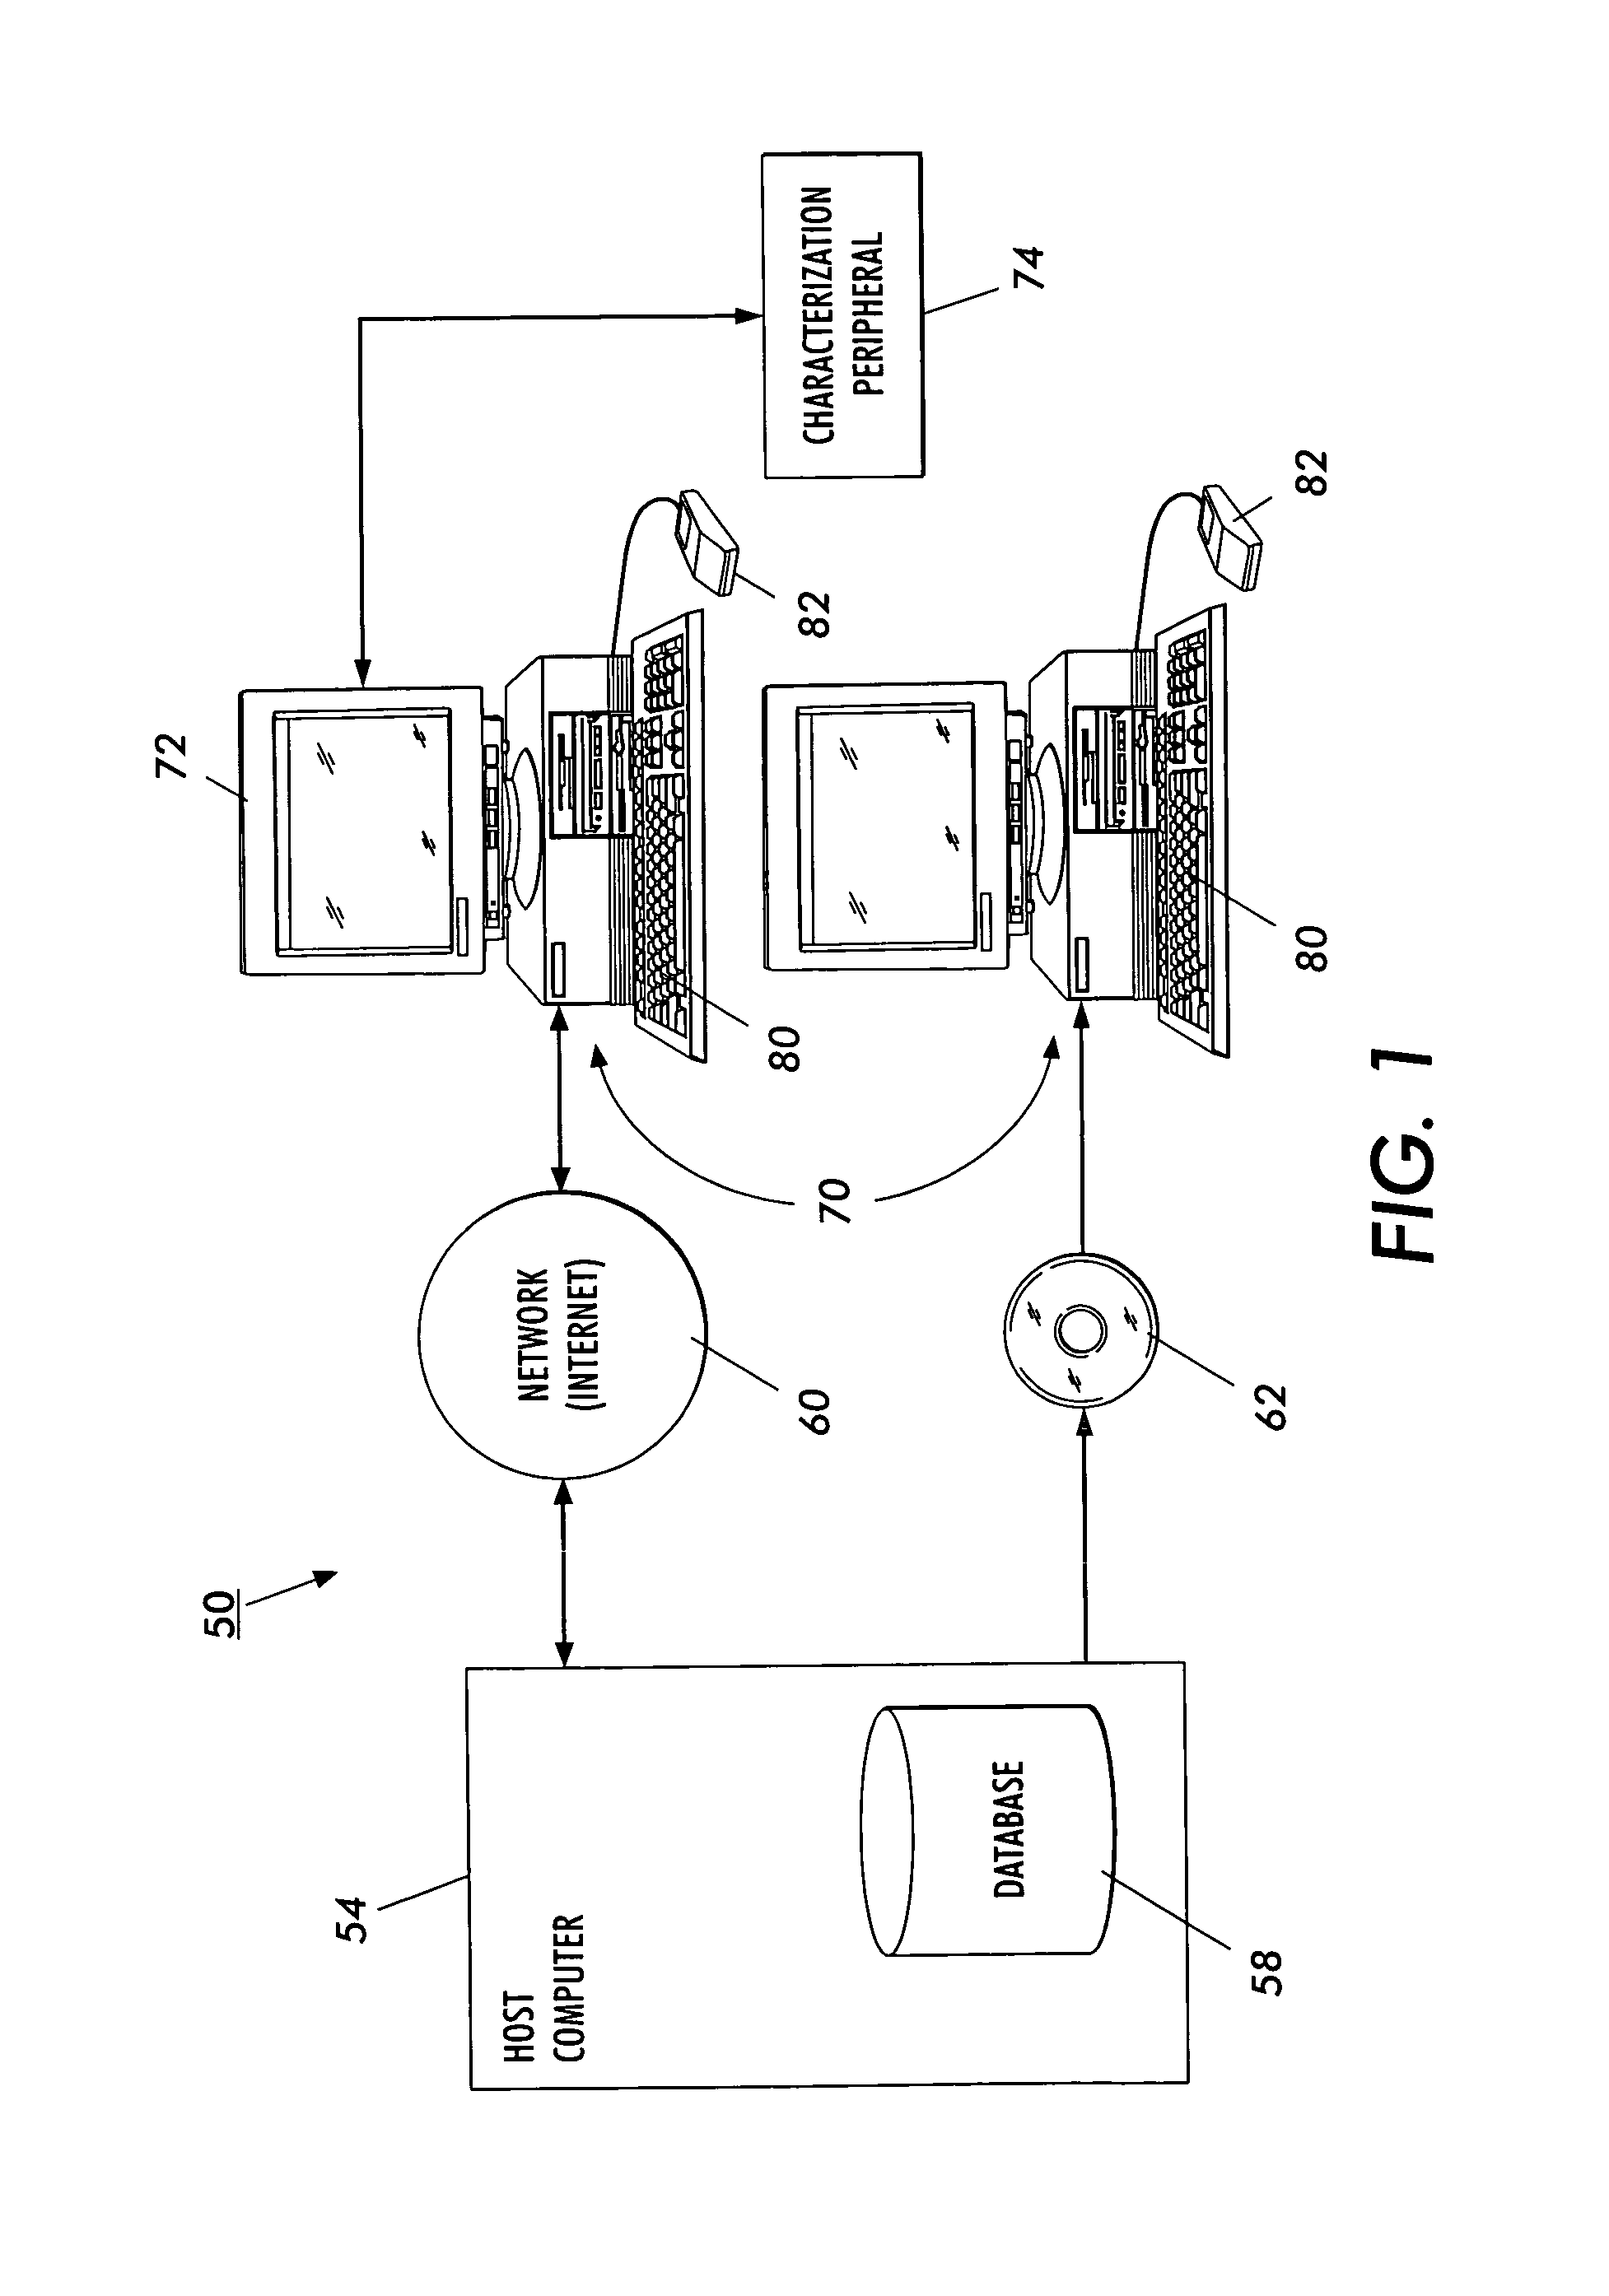 System and method to aid diagnoses using cross-referenced knowledge and image databases